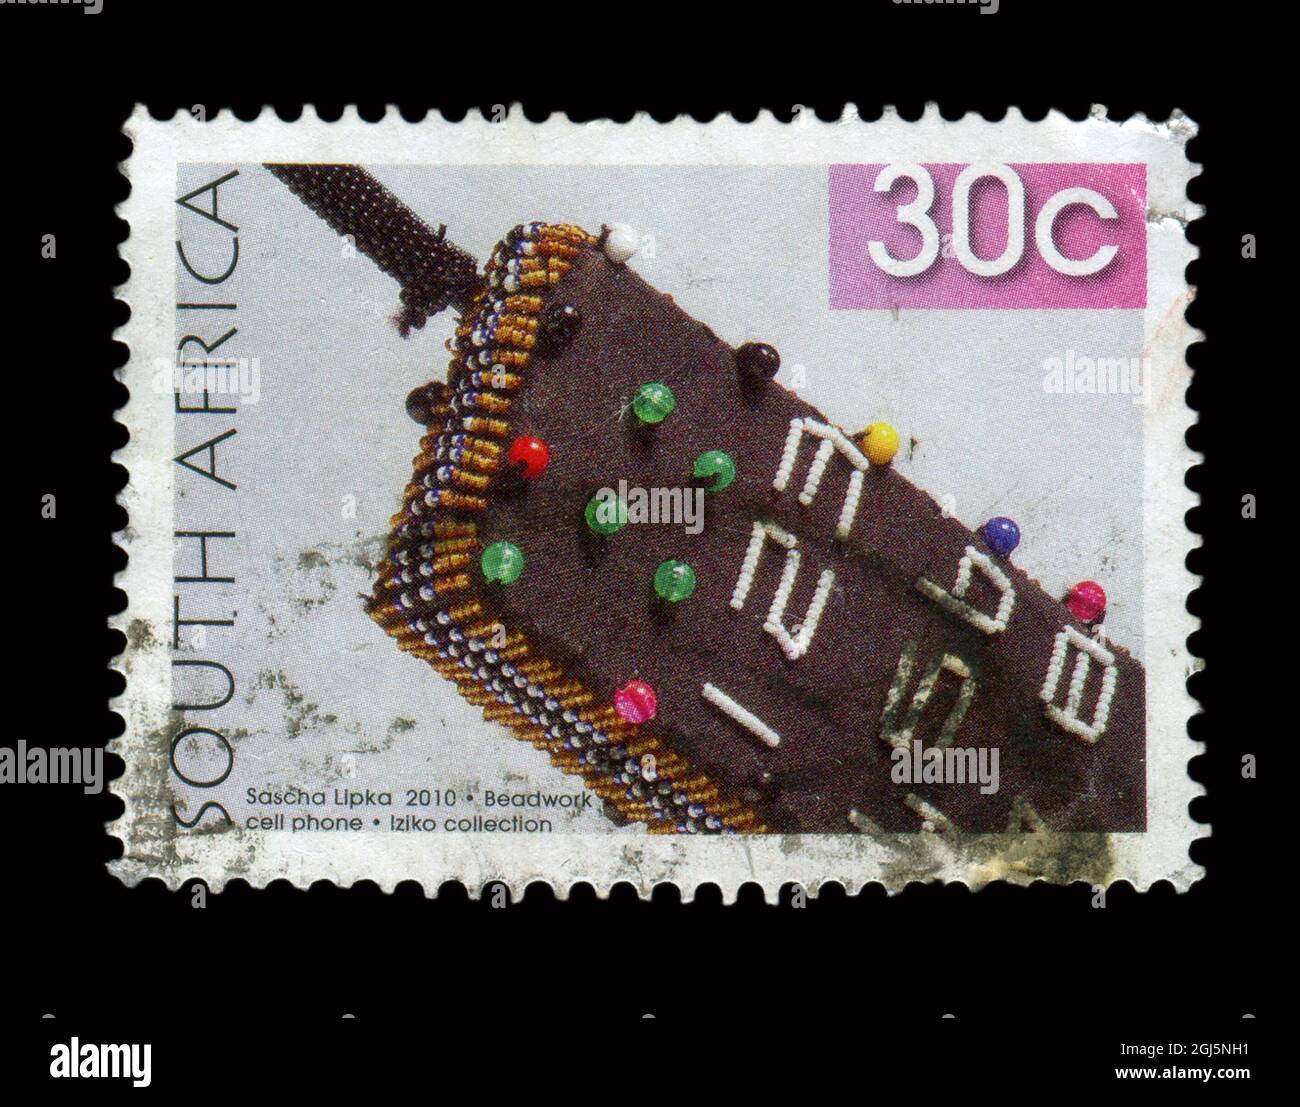 Stamp printed in South Africa shows image of the Beadwork cell phone, circa 2010. Stock Photo